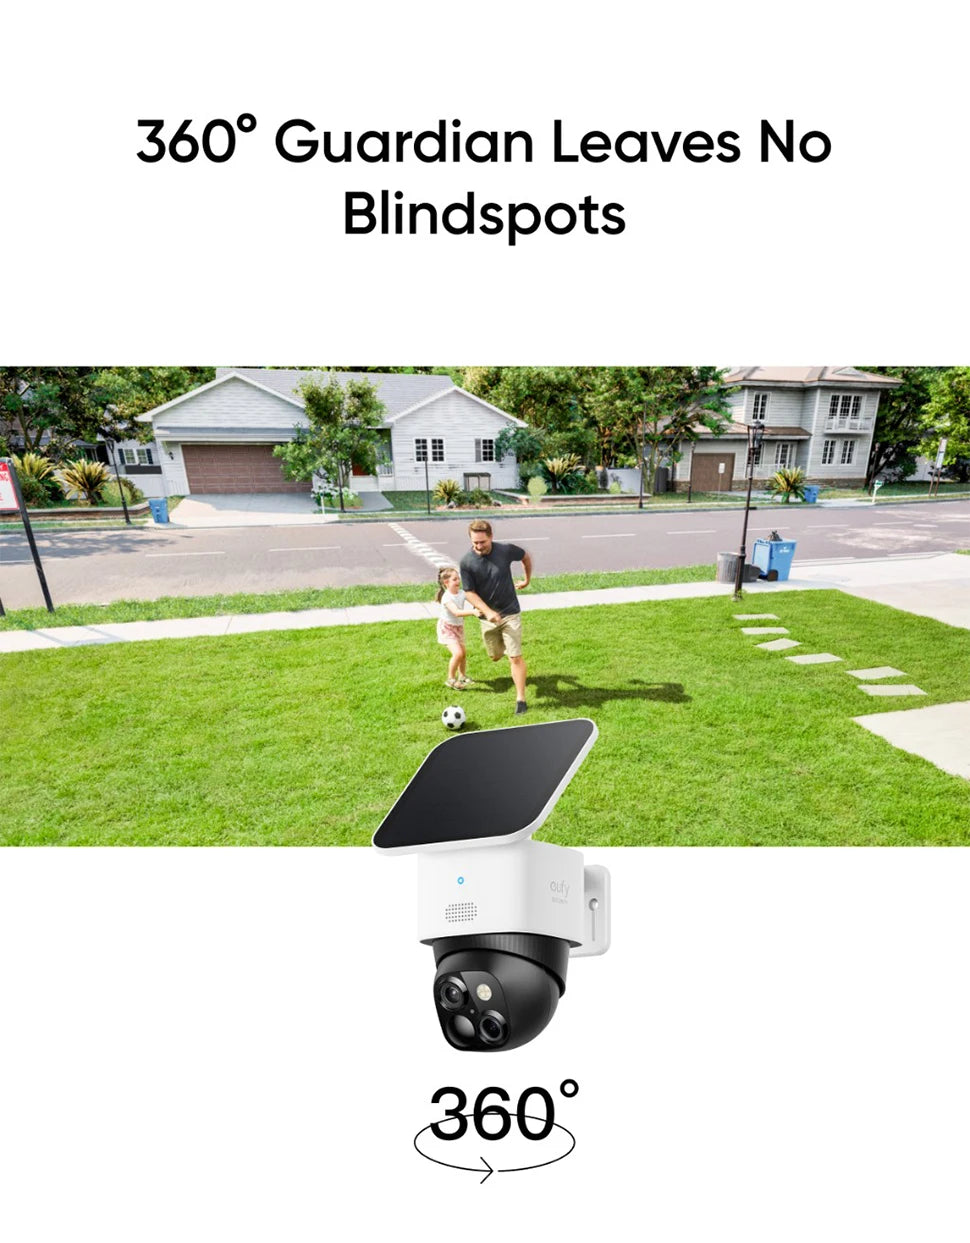 Eufy S340 SoloCam - Solar Security Camera, Complete coverage: 360-degree surveillance monitors all areas, eliminating blind spots.